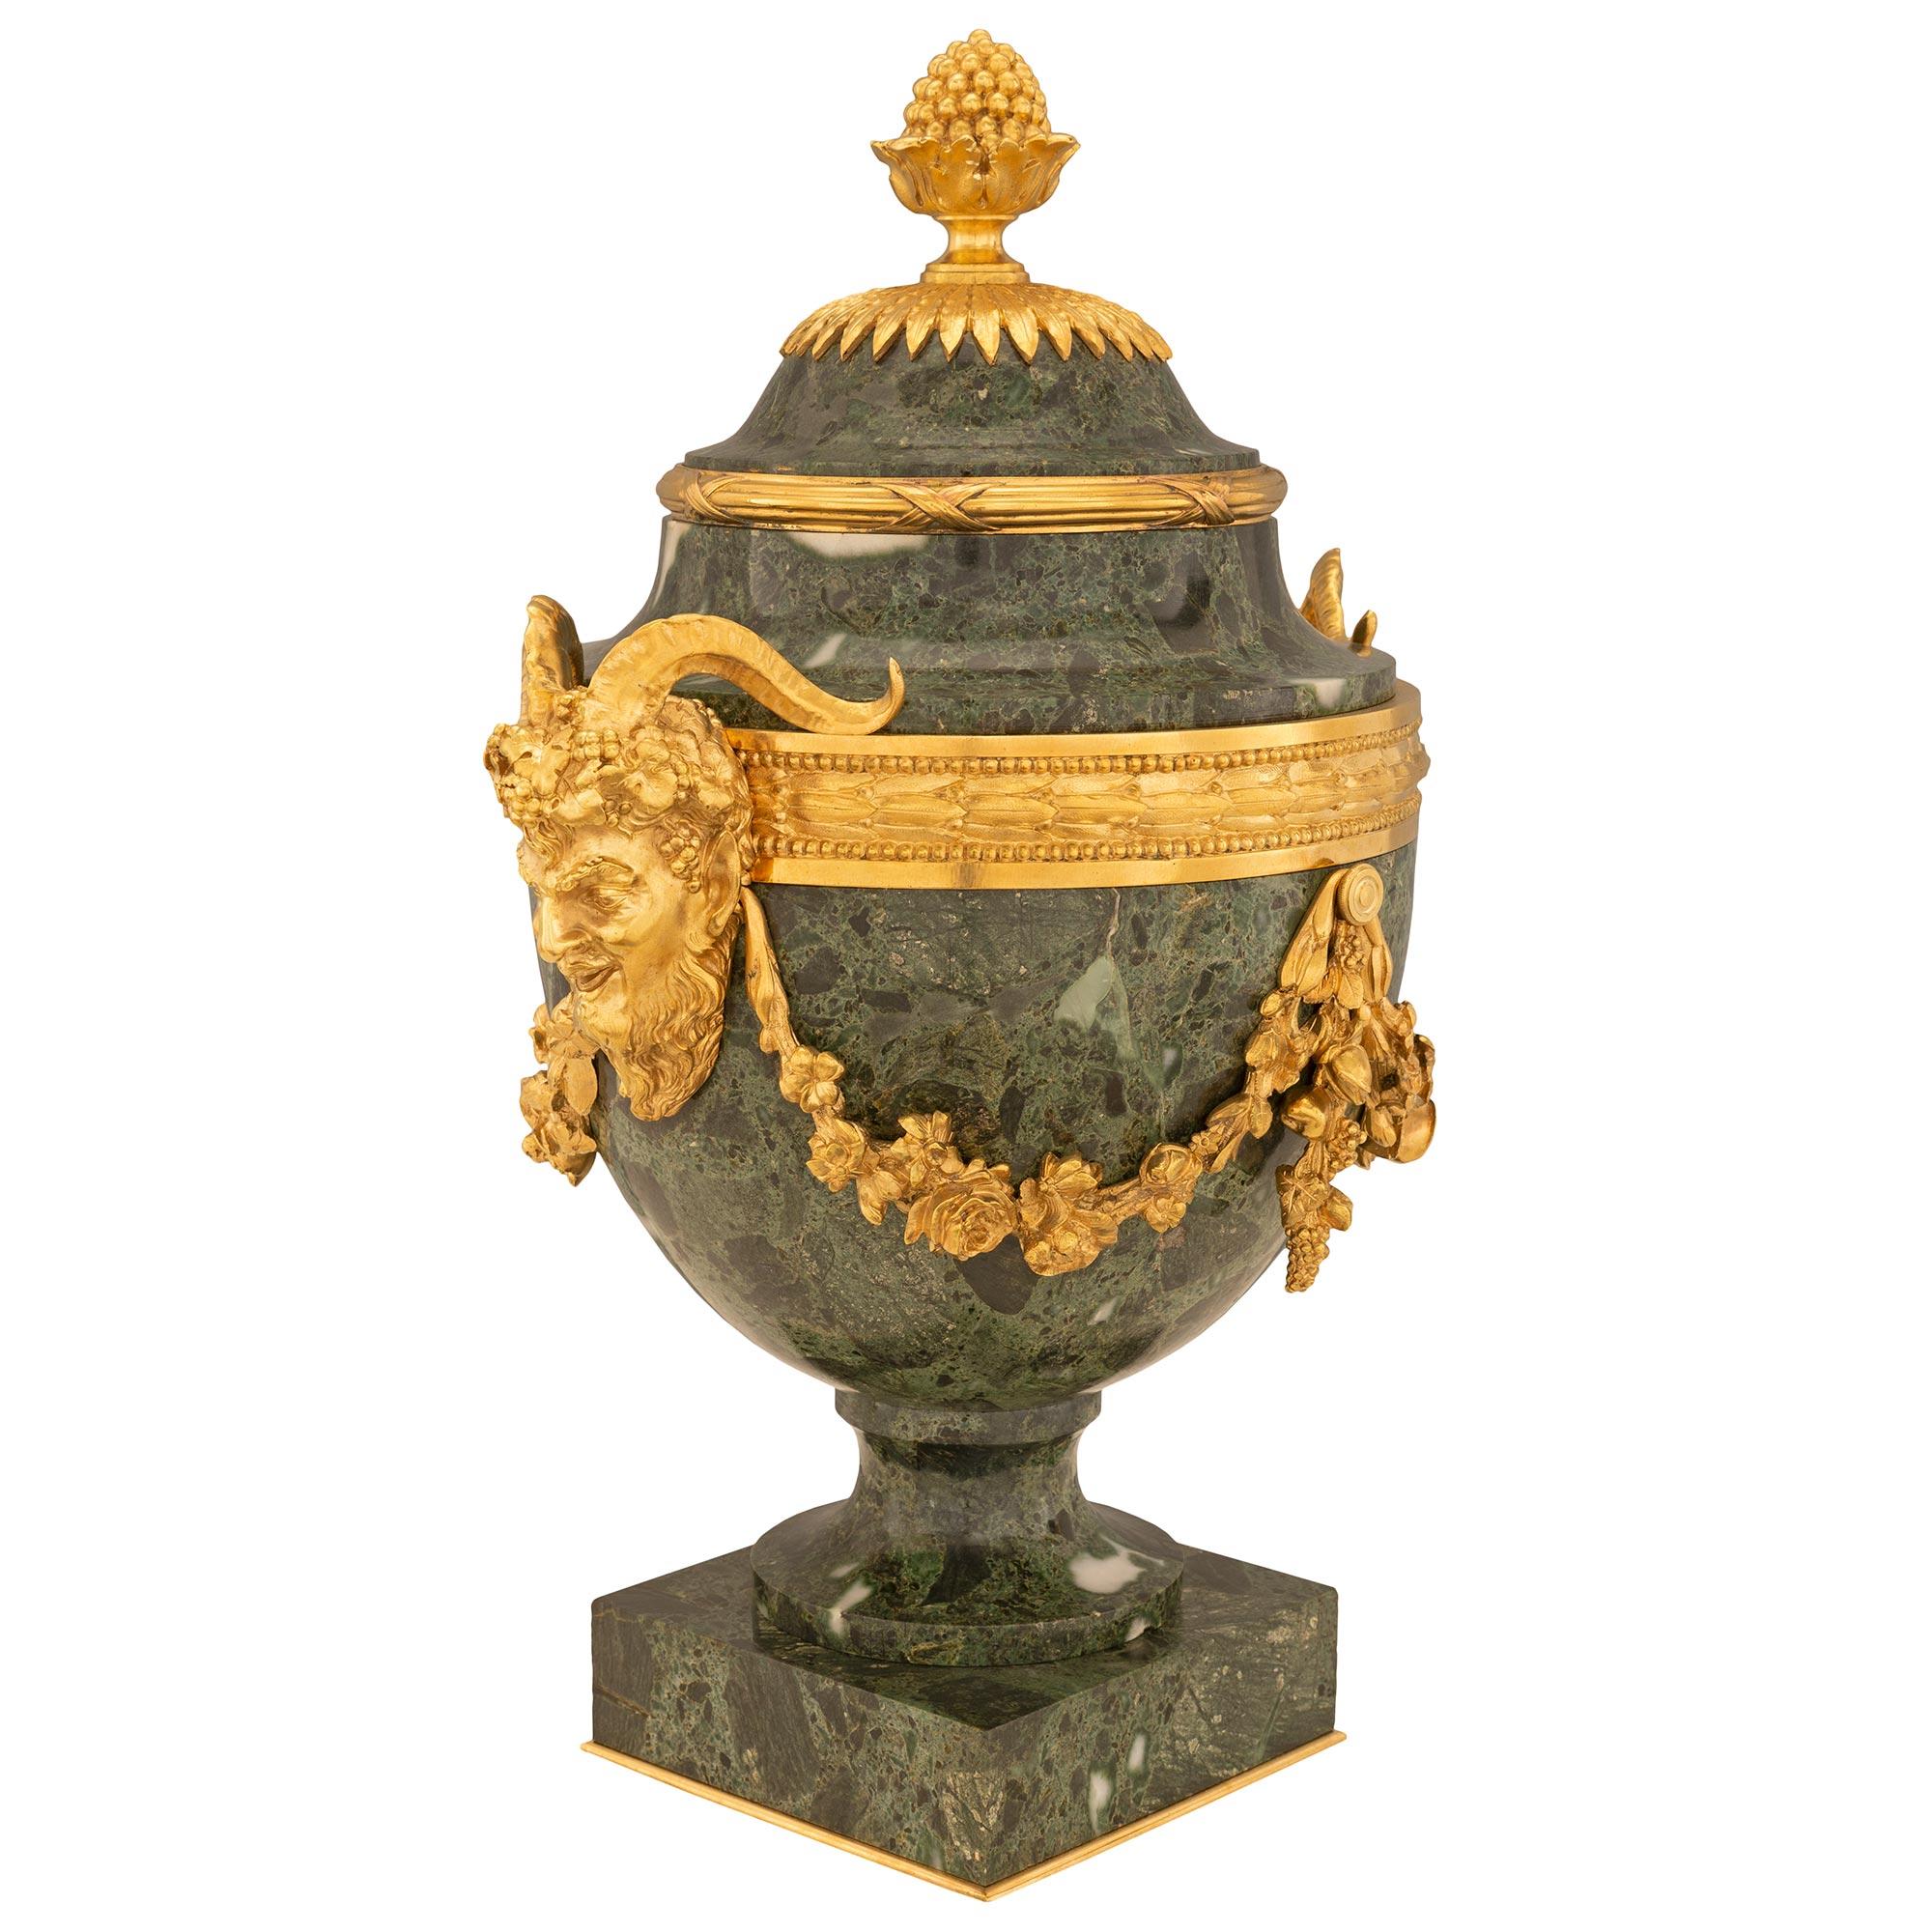 A striking and high quality pair of French 19th century Louis XVI st. Belle Époque period Vert Antique marble and ormolu urns. Each urn is raised by a square marble base with a fine bottom ormolu band below the elegantly curved socle shaped pedestal